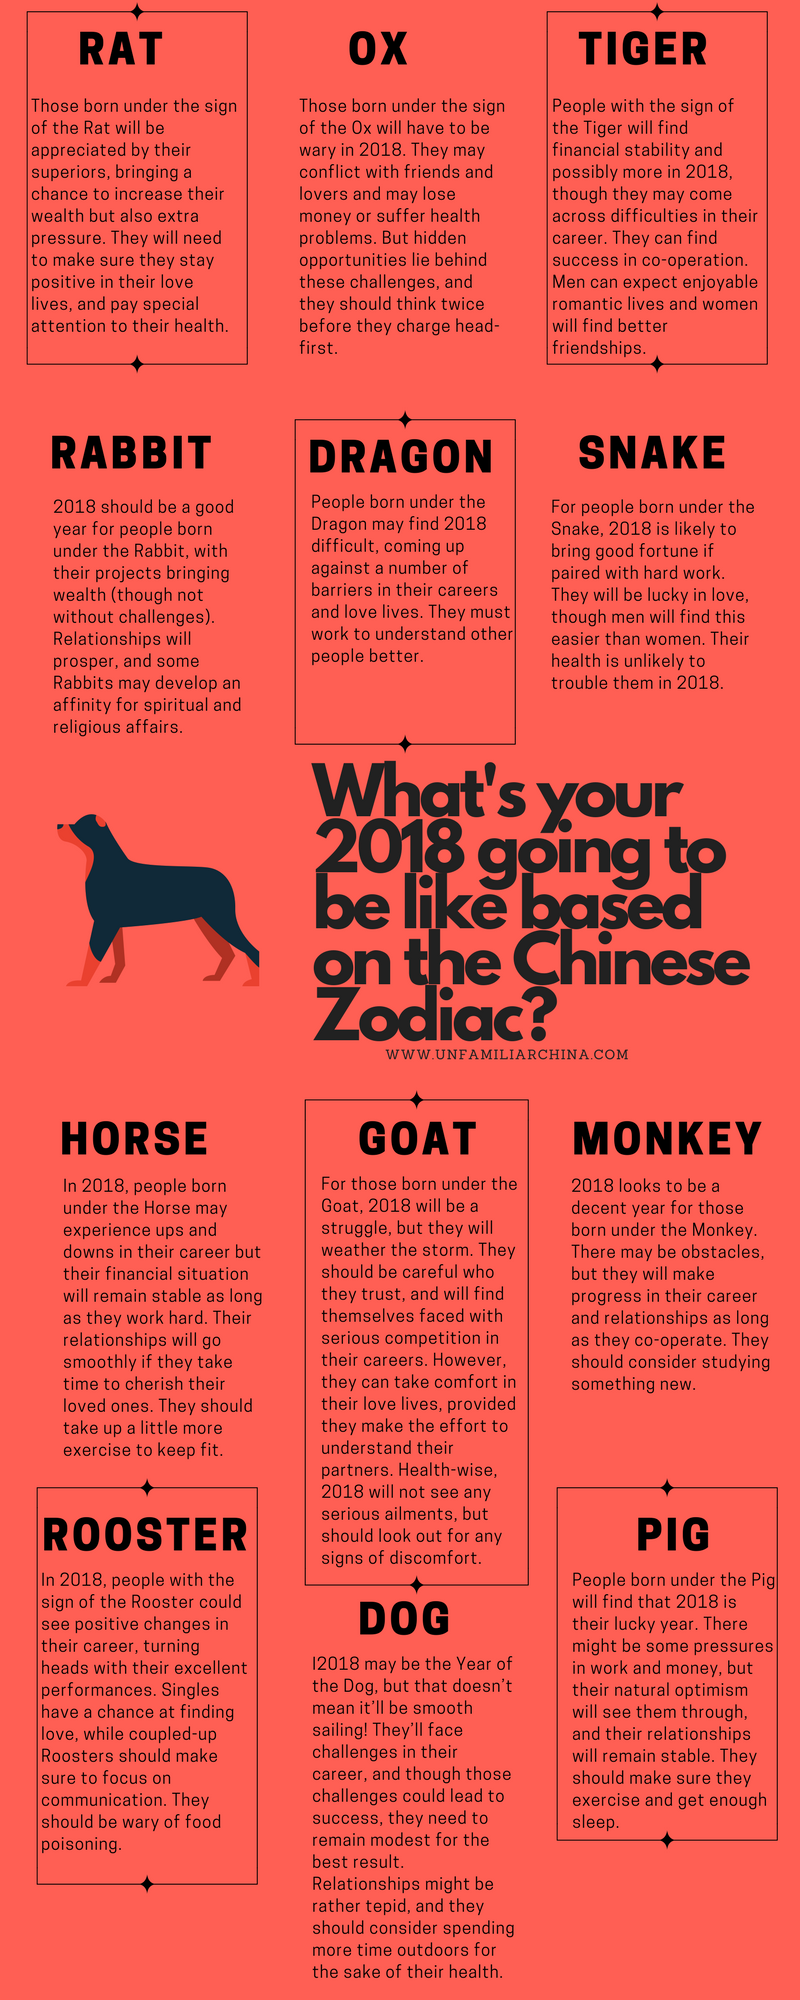 Infographic] A Guide to the Chinese Zodiac | Unfamiliar China